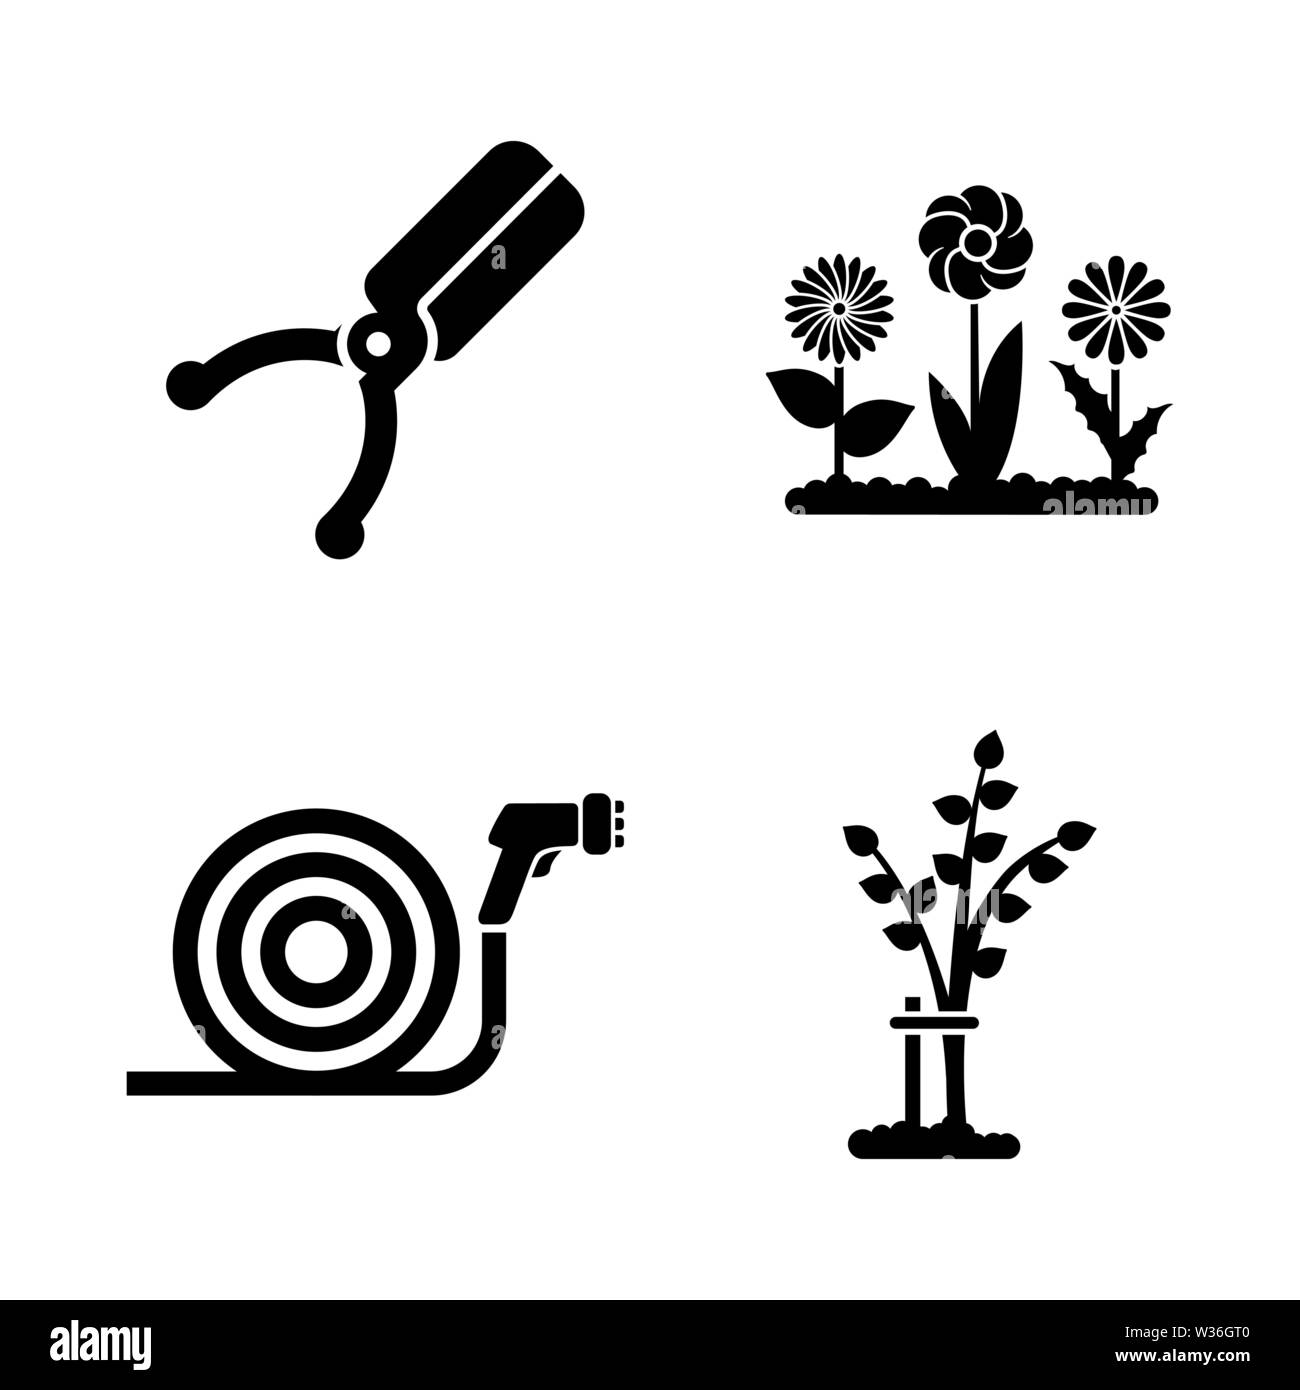 Gardening. Simple Related Vector Icons Set for Video, Mobile Apps, Web Sites, Print Projects and Your Design. Black Flat Illustration on White Backgro Stock Vector